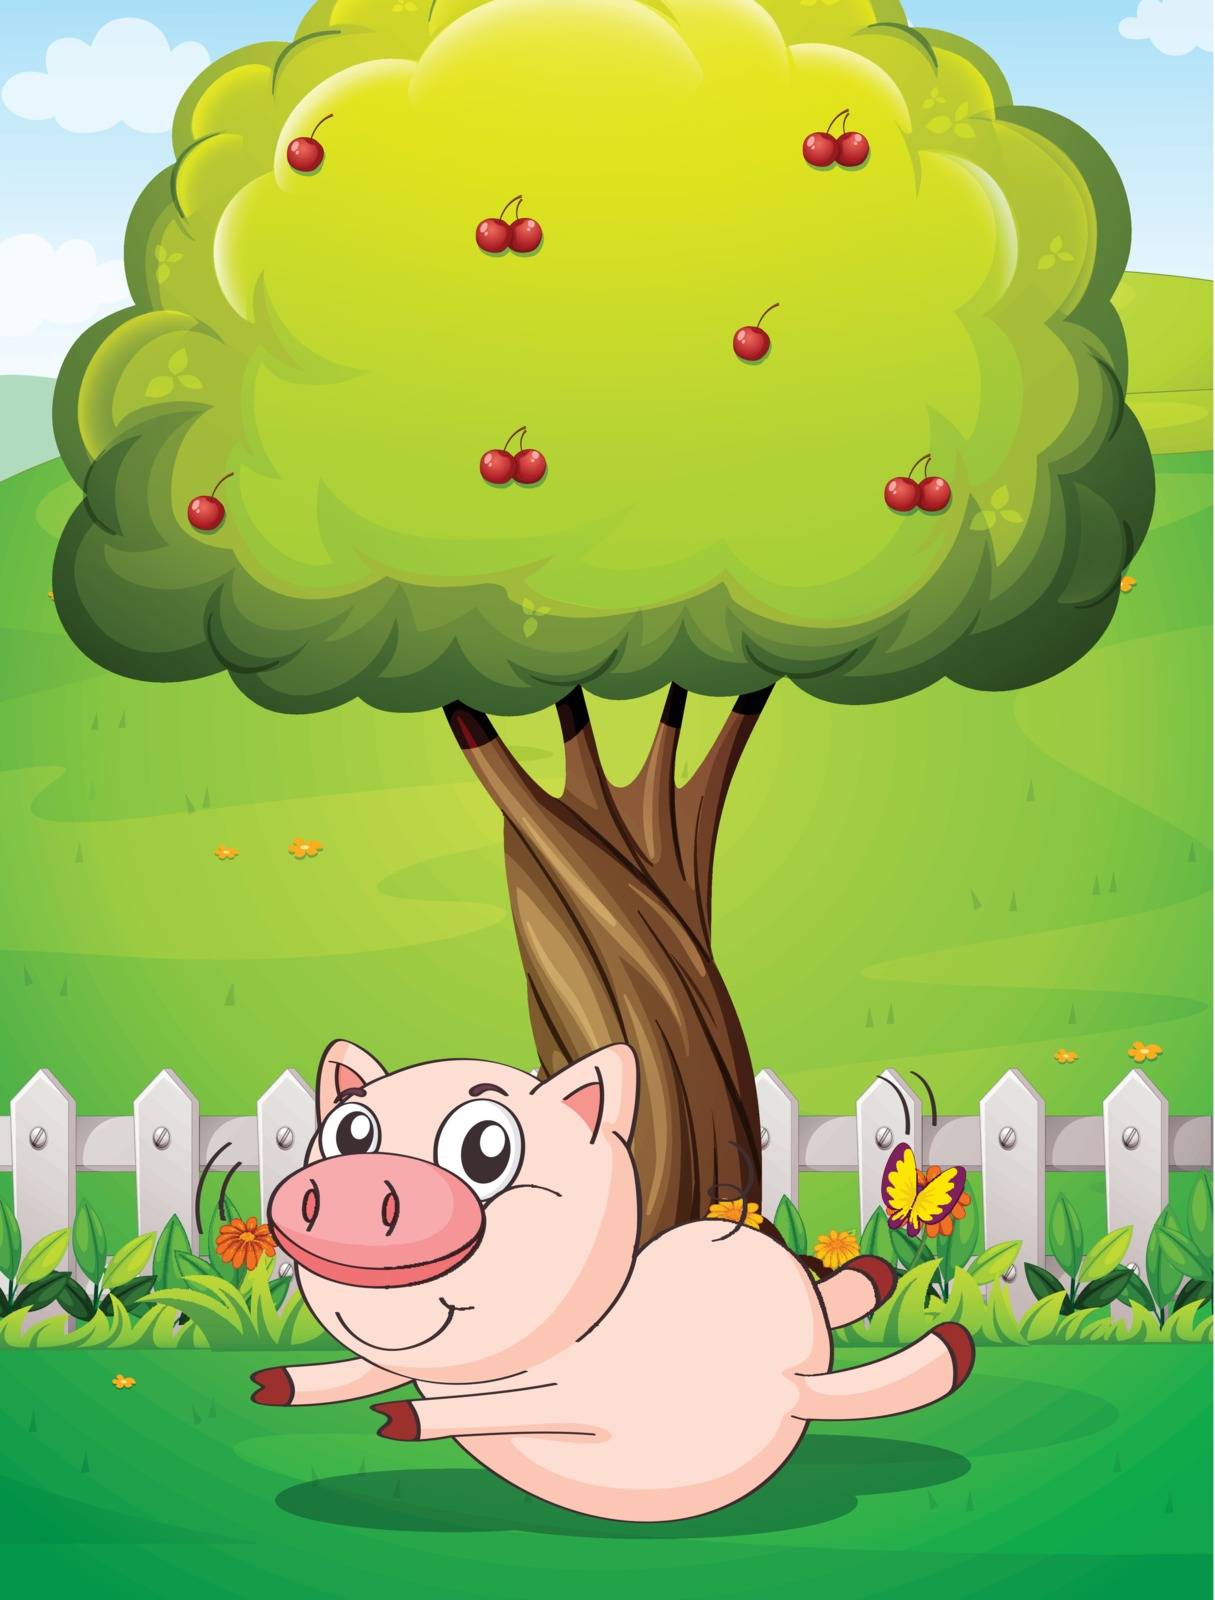 A playful pig under the cherry tree by iimages